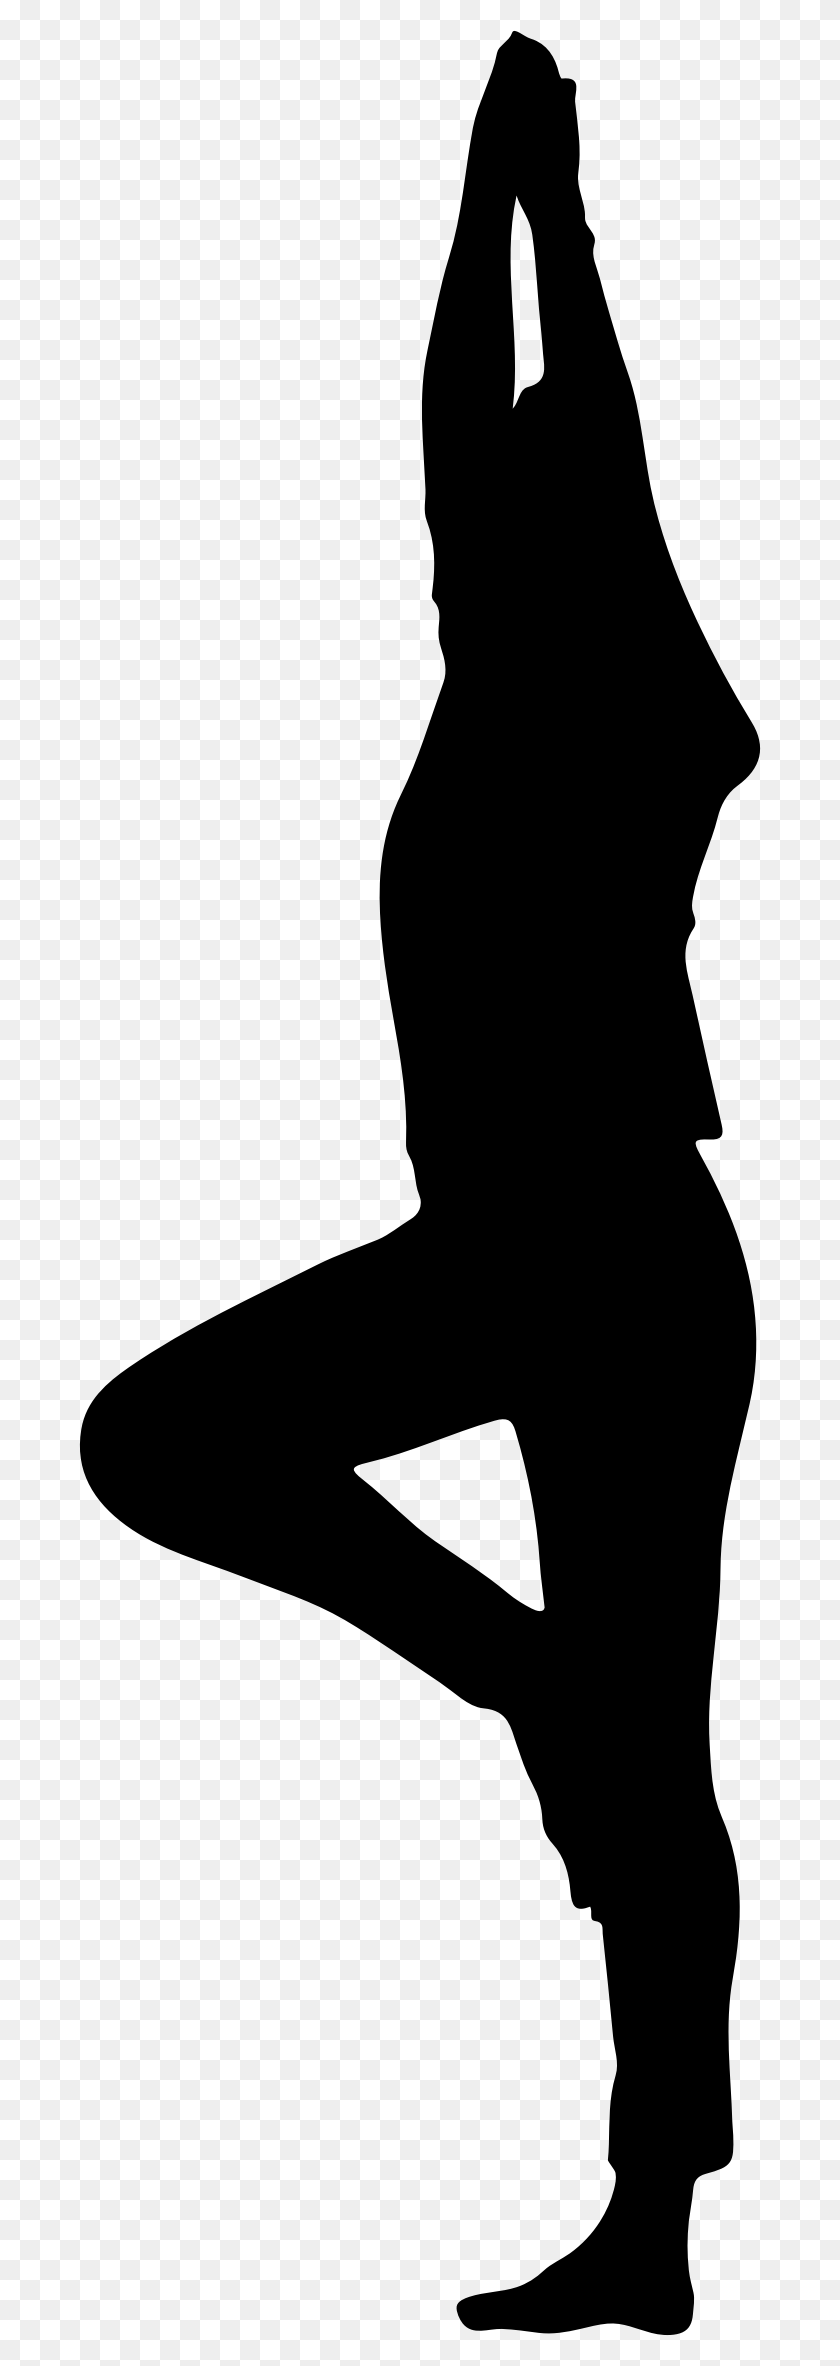 682x2306 This Free Icons Design Of Female Yoga Pose Minus Silhouette Of Yoga Poses Clipart, Gray, World Of Warcraft Hd Png